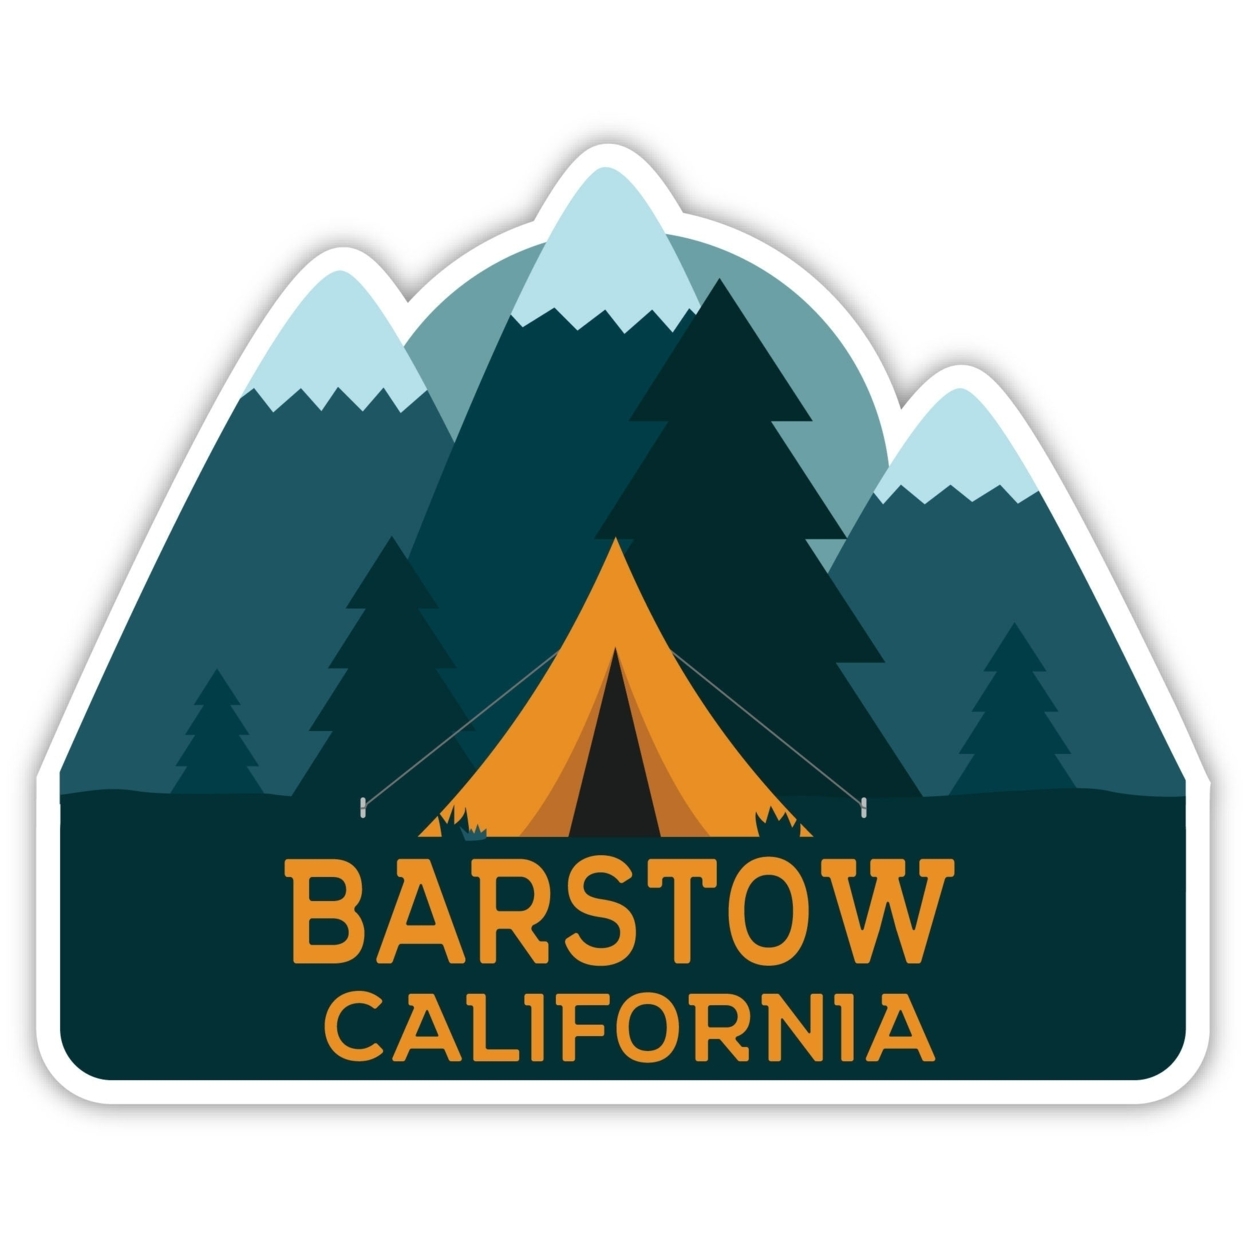 Barstow California Souvenir Decorative Stickers (Choose Theme And Size) - Single Unit, 12-Inch, Adventures Awaits